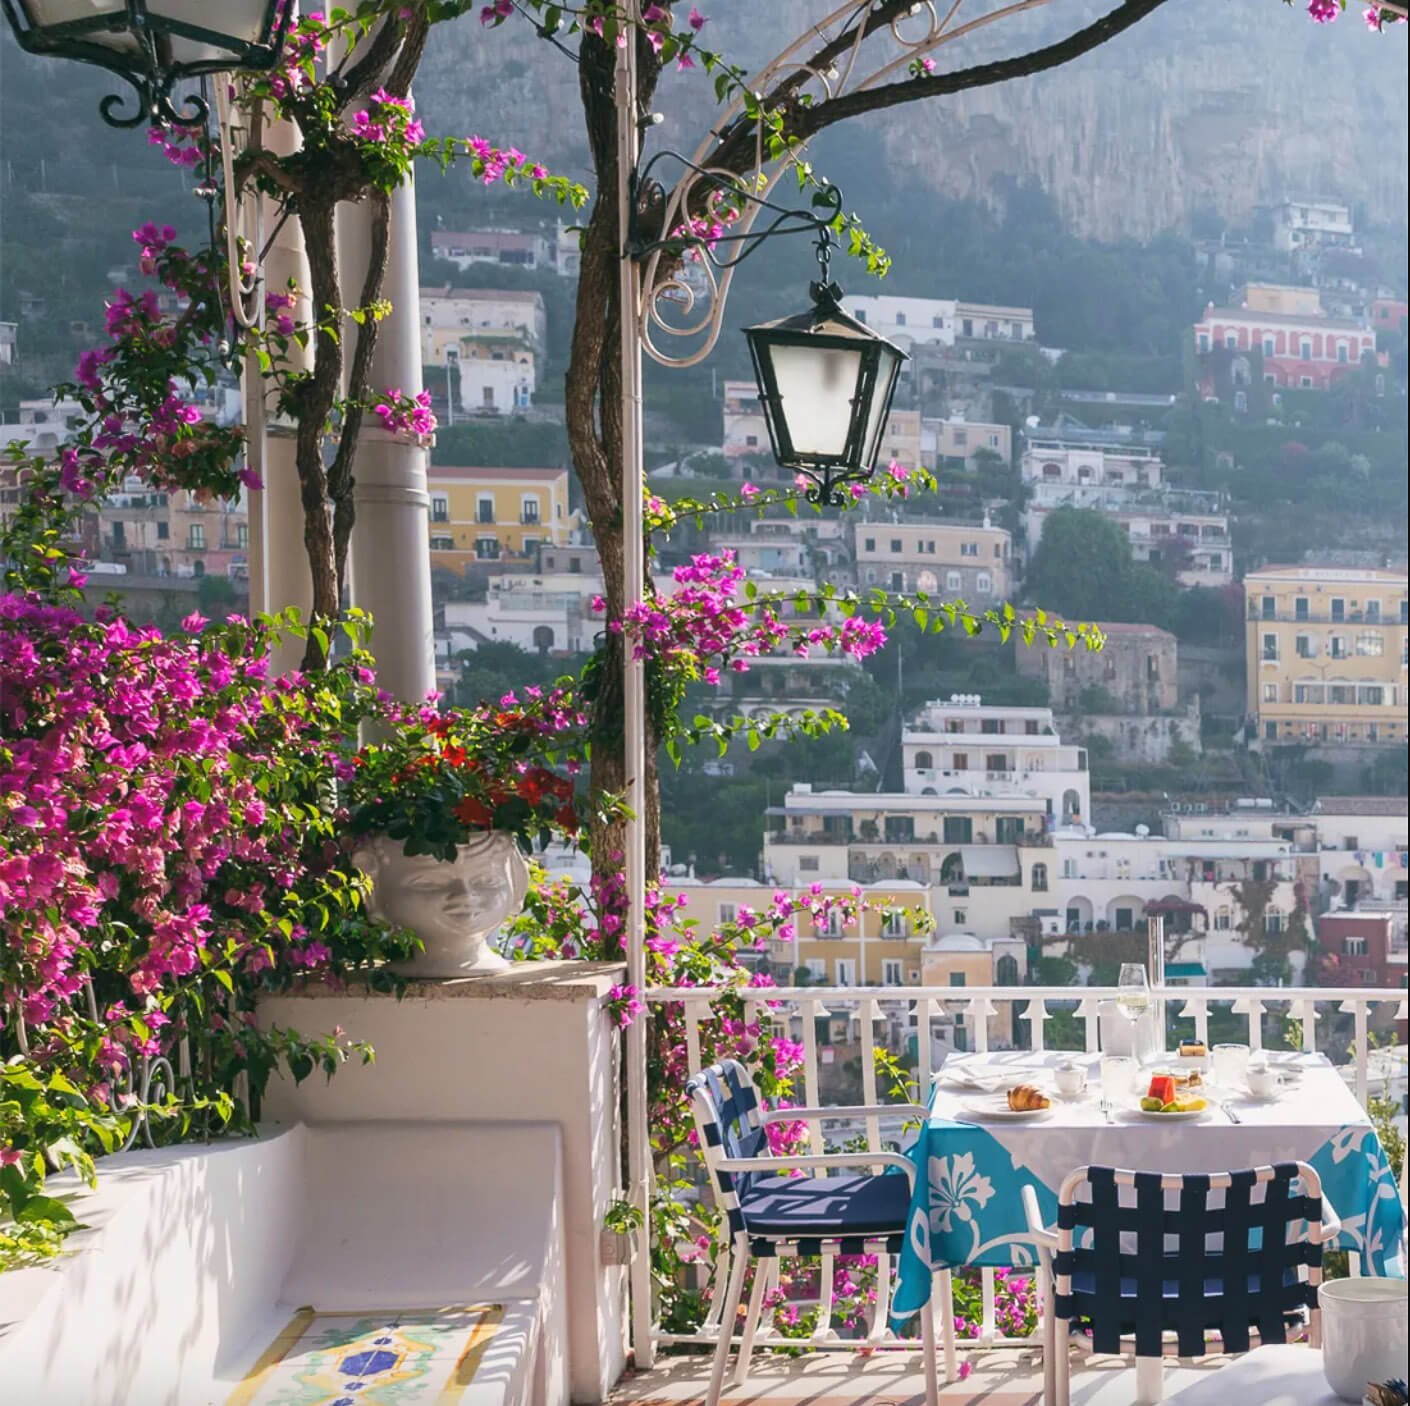 Il Tridente Restaurant and Cocktail Bar is located at Hotel Poseidon and is one of the best restaurants in Positano